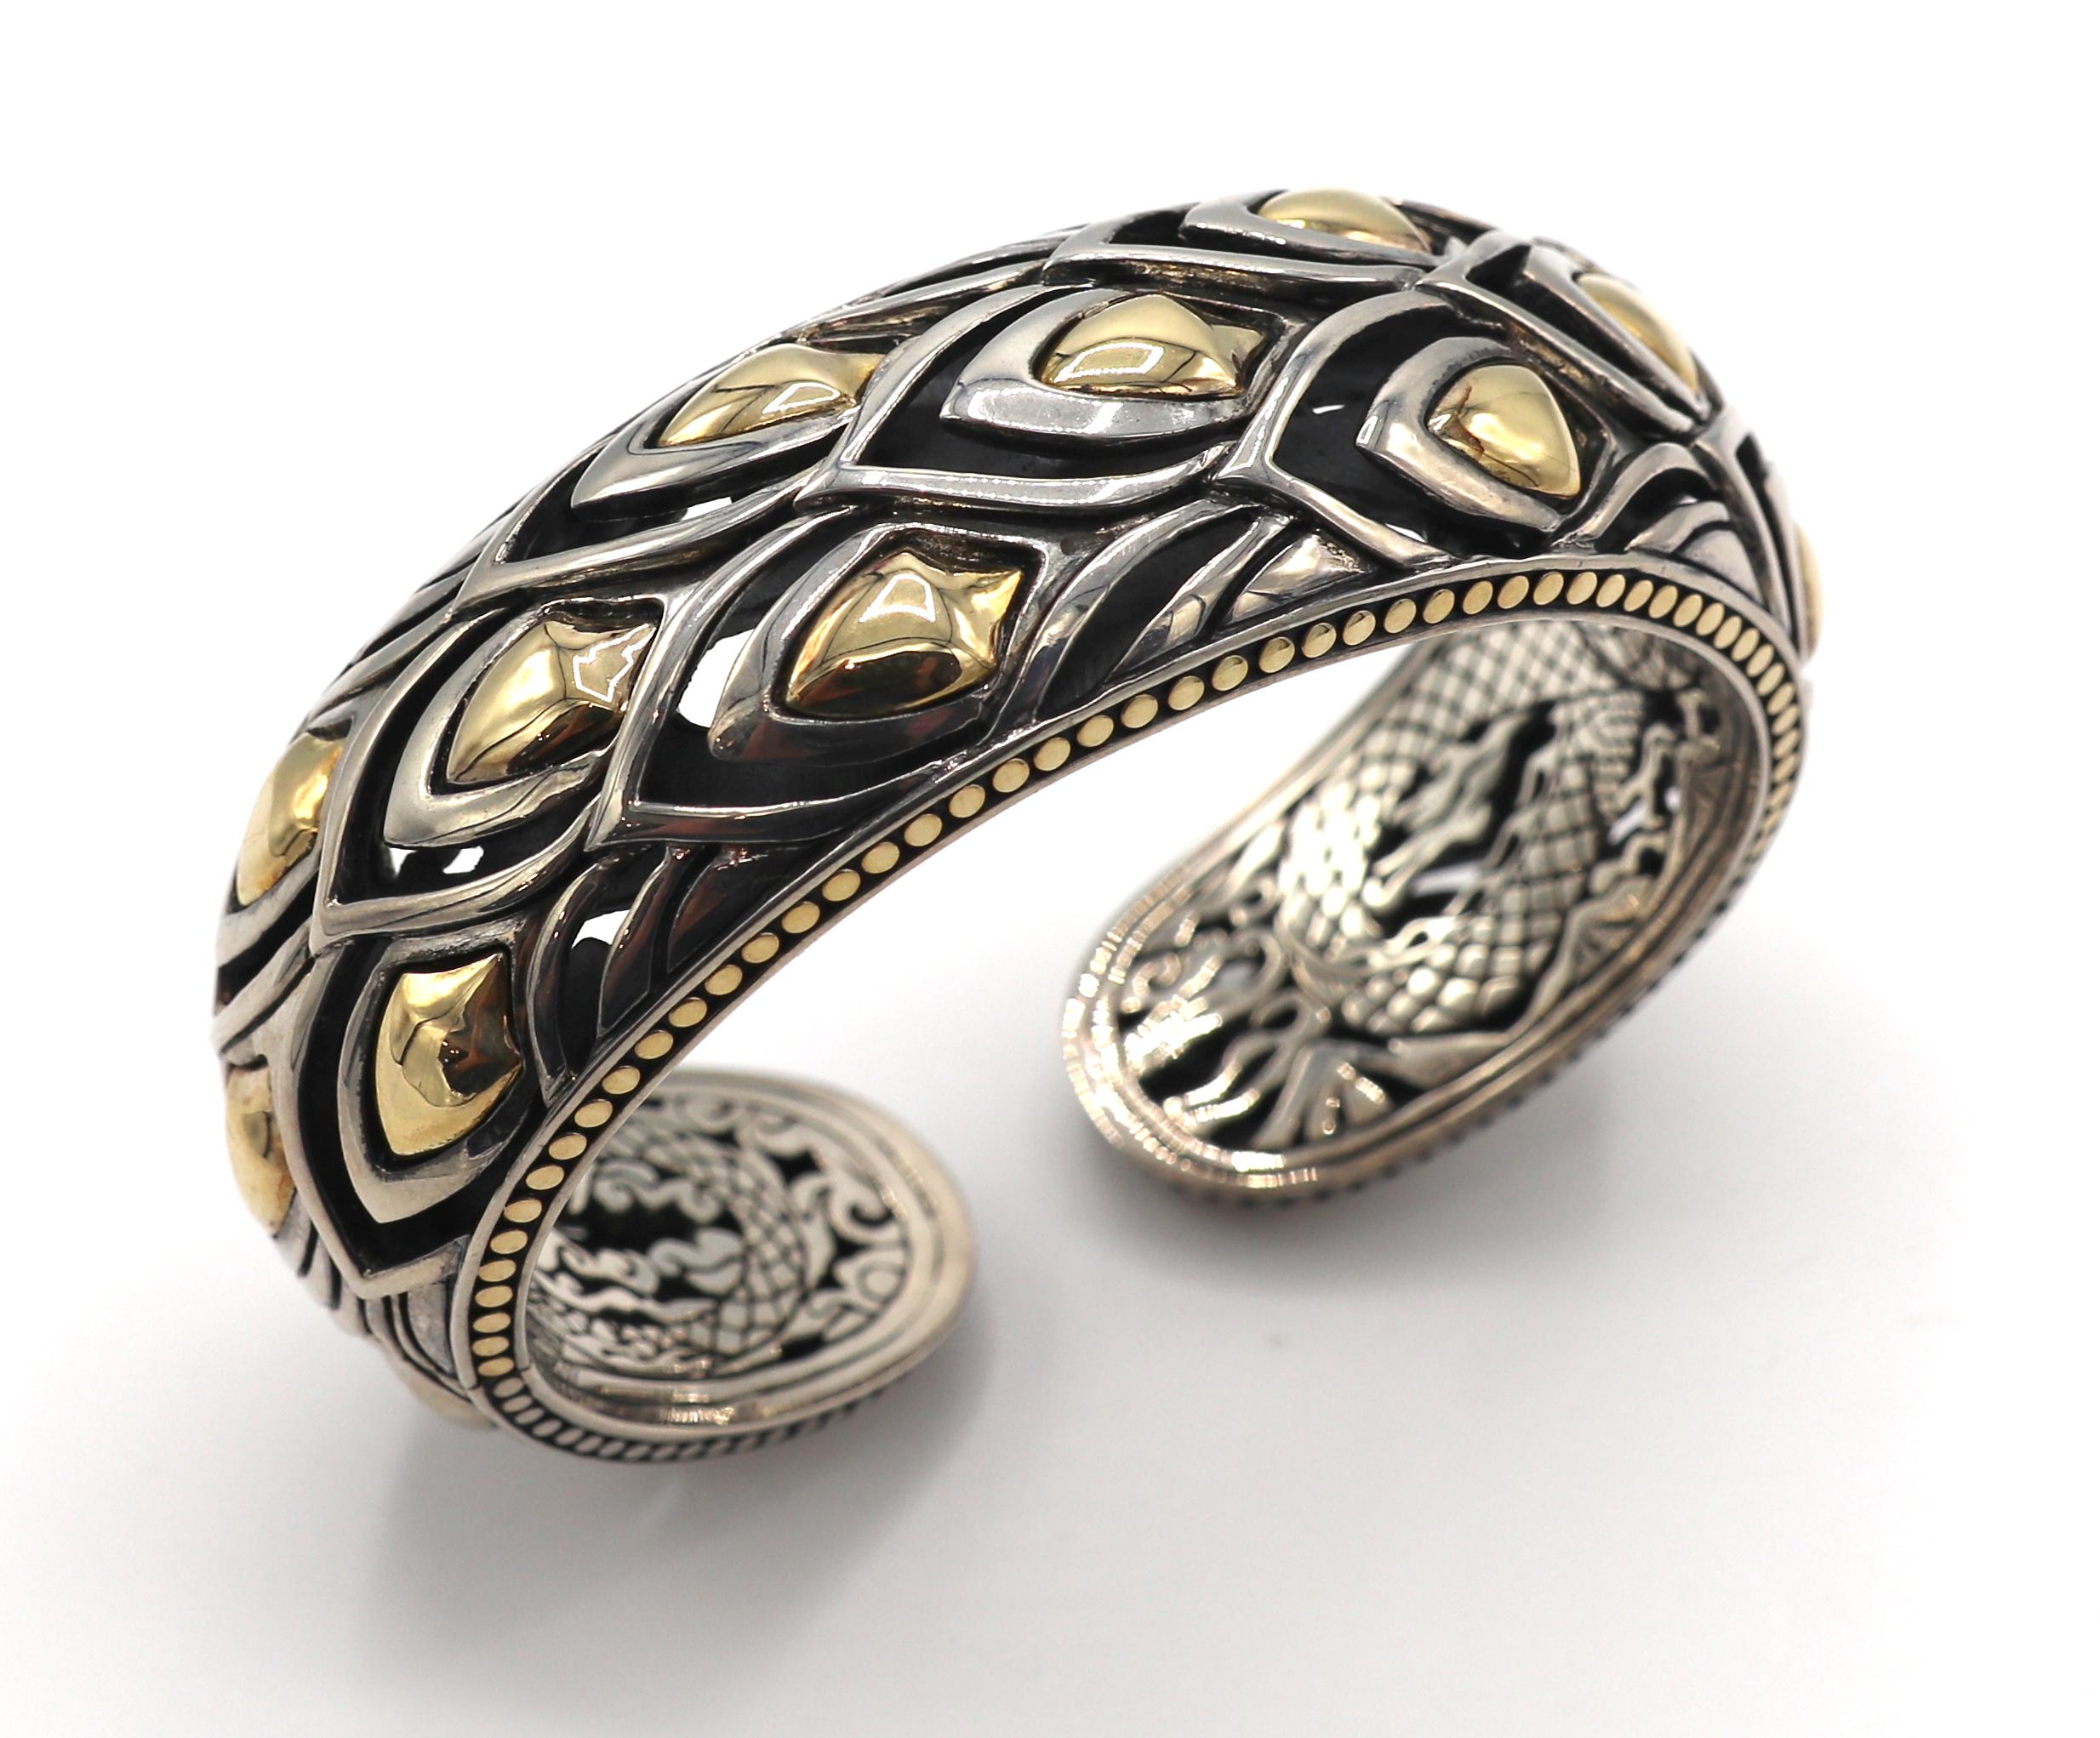 John Hardy Sterling Silver & Gold Naga Kick Cuff Dragon Scale Bracelet 
Metal: Sterling silver & 18k yellow gold
Weight: 98.4 grams
Width: 24mm
Inner diameter: 62mm
Outer diameter: 75mm
Length: Fits approx. 6.75